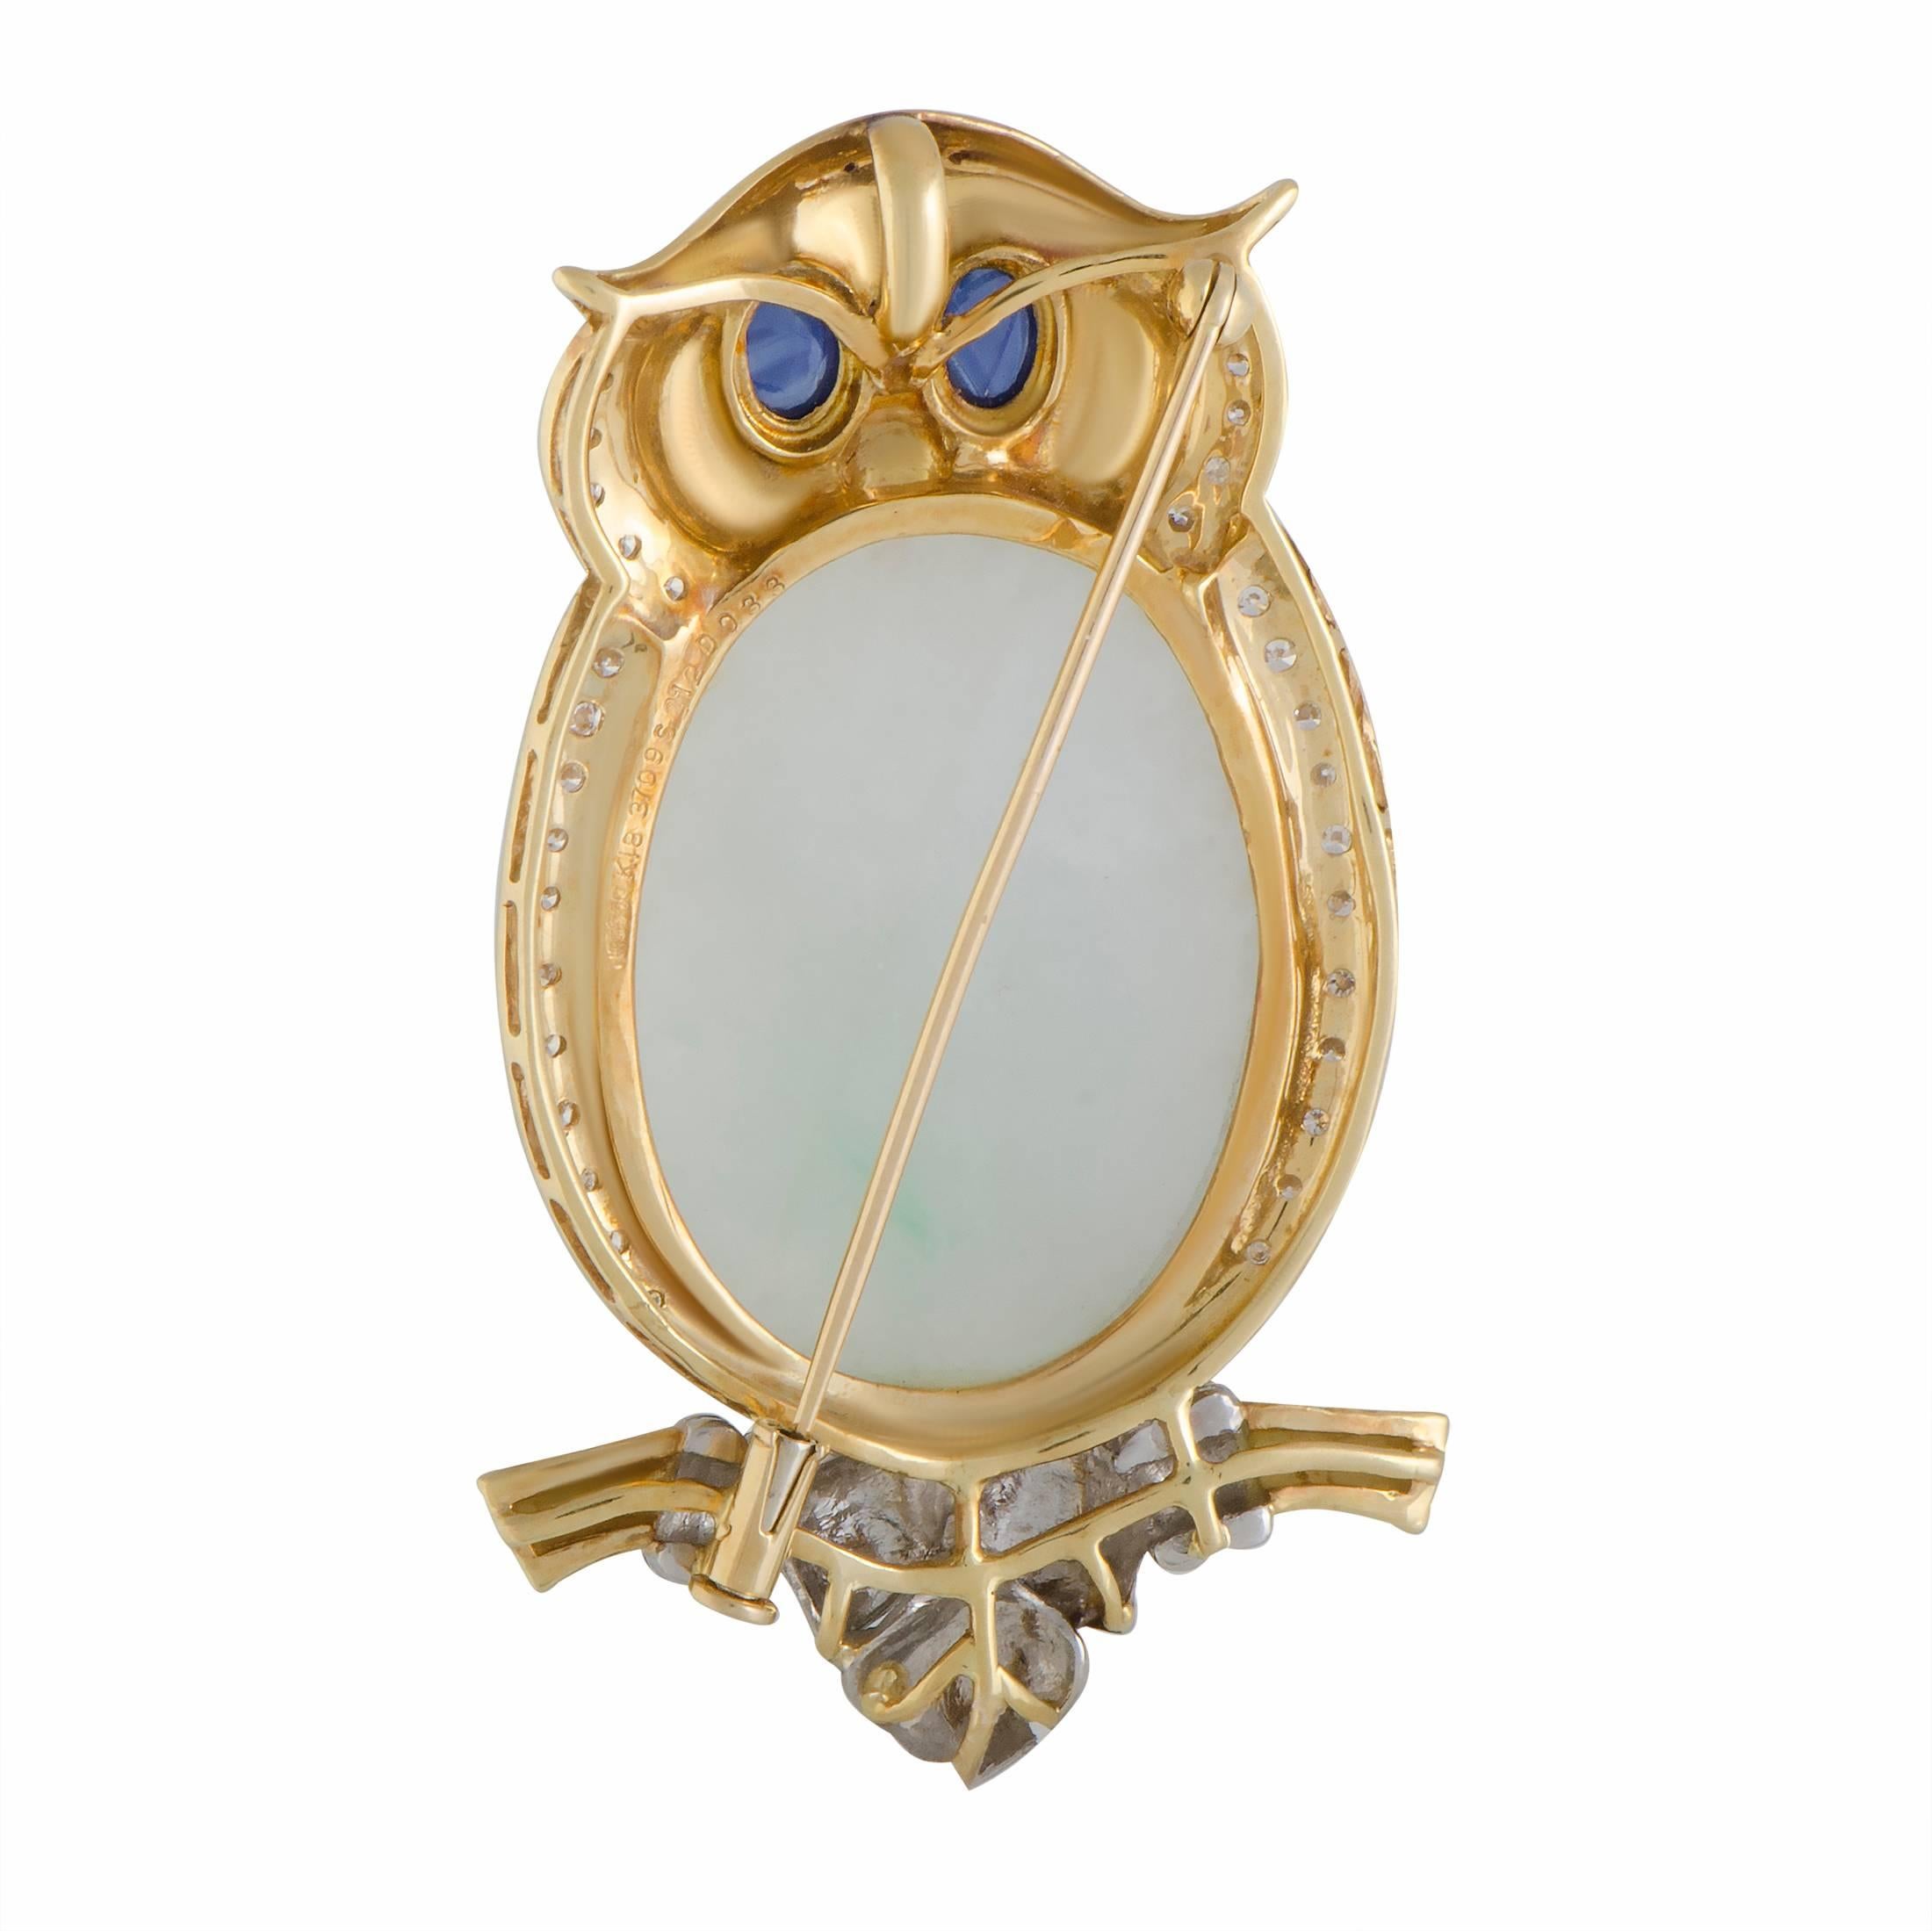 Depicting an owl in an incredibly prestigious manner, this extraordinary brooch that can also be worn as a pendant boasts a stunningly offbeat appeal. The brooch is made of 18K yellow and white gold and it is decorated with 1.00 carat of sapphires,